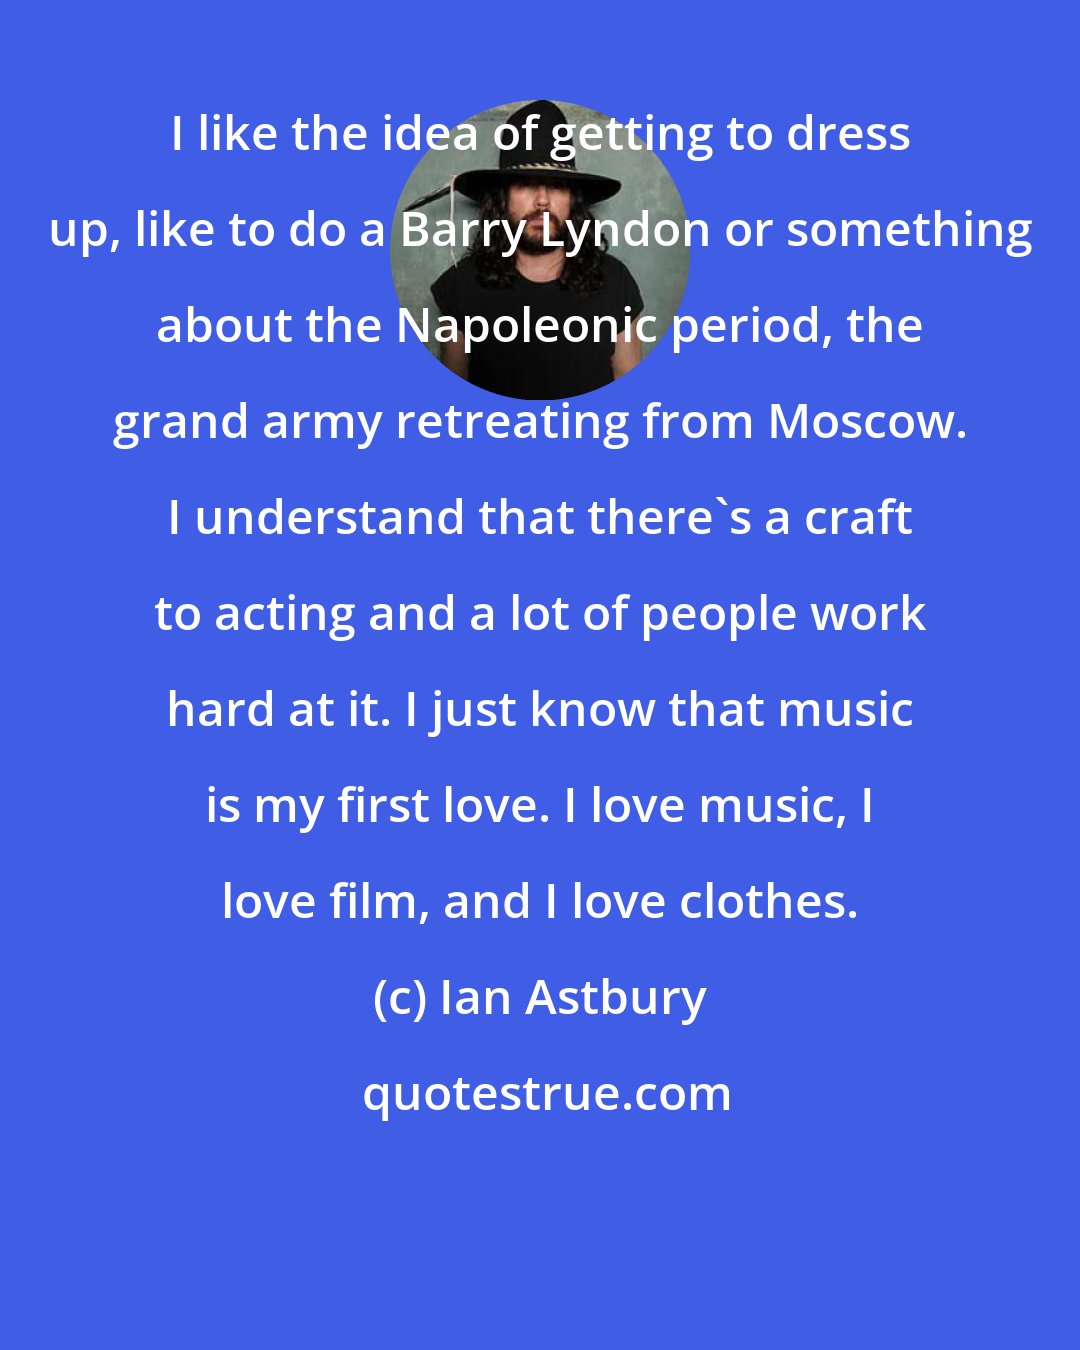 Ian Astbury: I like the idea of getting to dress up, like to do a Barry Lyndon or something about the Napoleonic period, the grand army retreating from Moscow. I understand that there's a craft to acting and a lot of people work hard at it. I just know that music is my first love. I love music, I love film, and I love clothes.